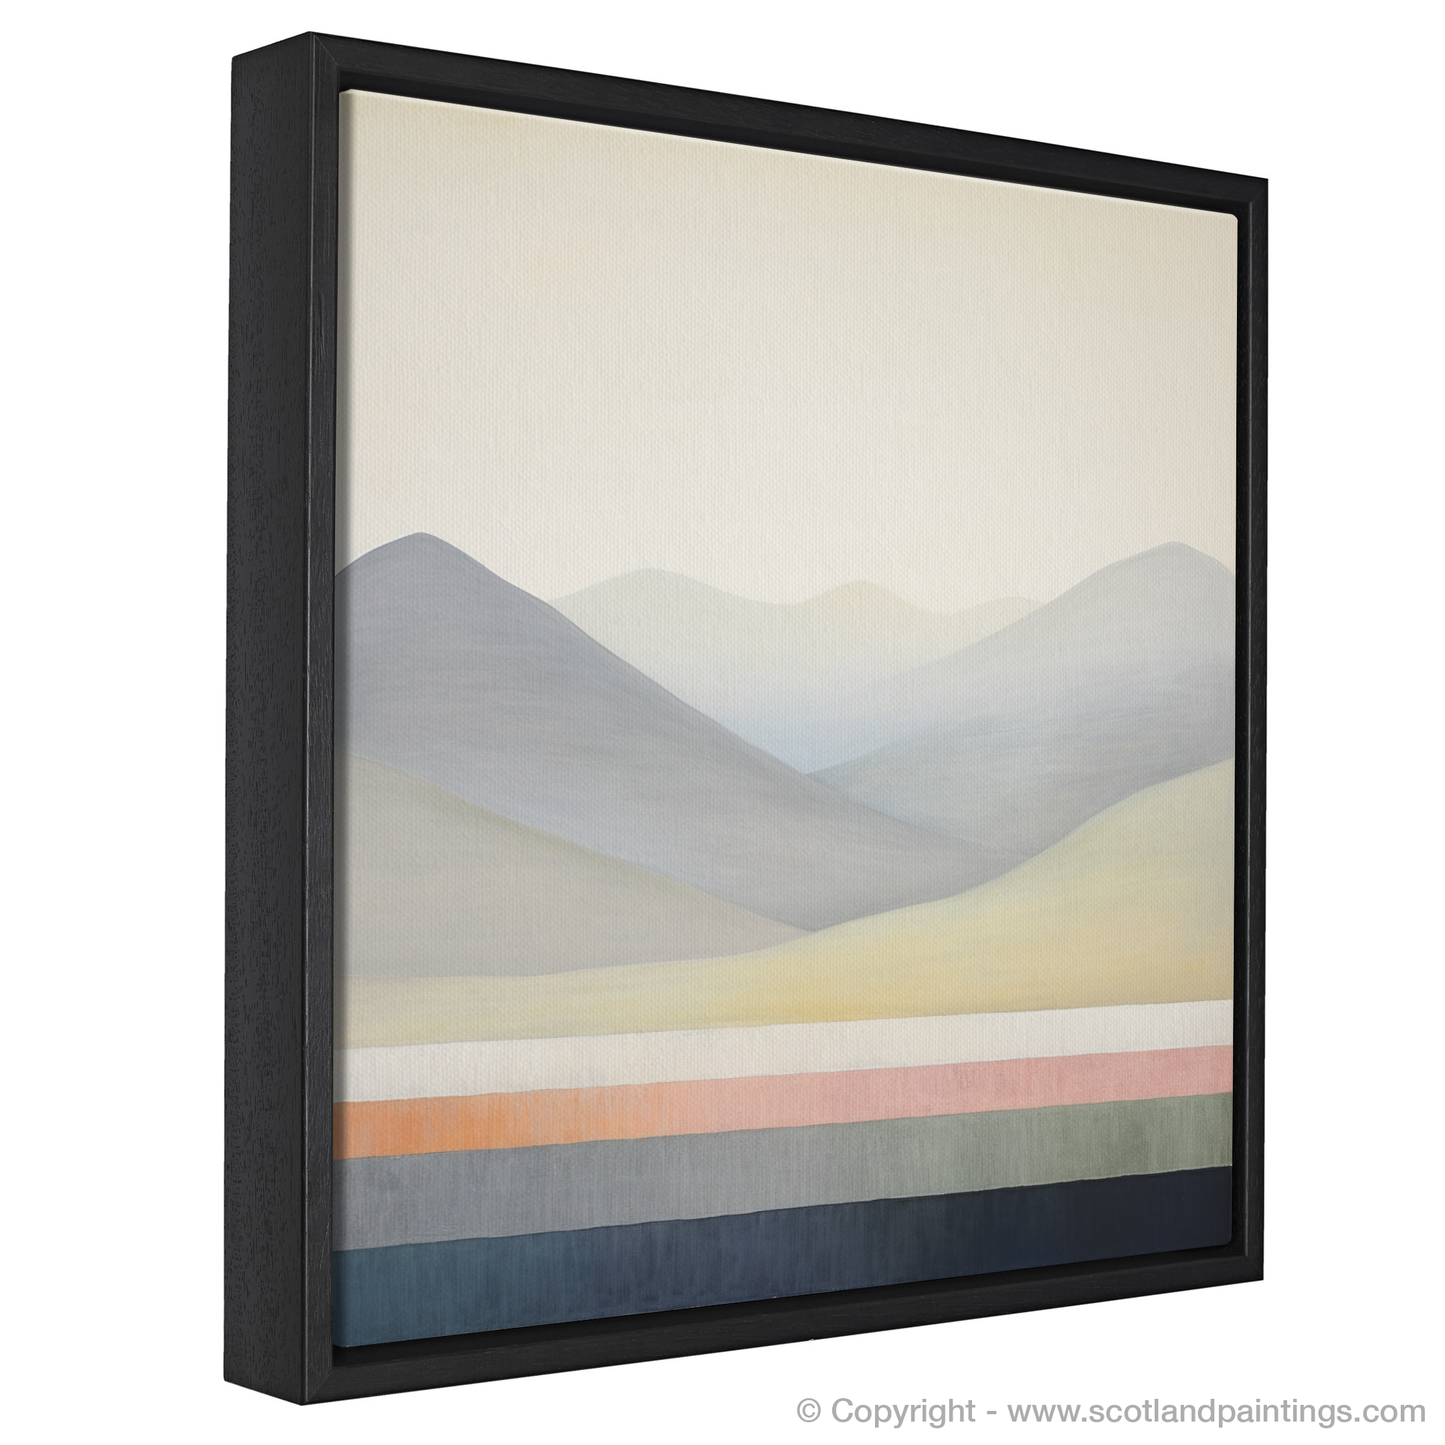 Painting and Art Print of The Cairnwell entitled "Abstract Cairnwell: An Artistic Tribute to Scotland's Highland Majesty".